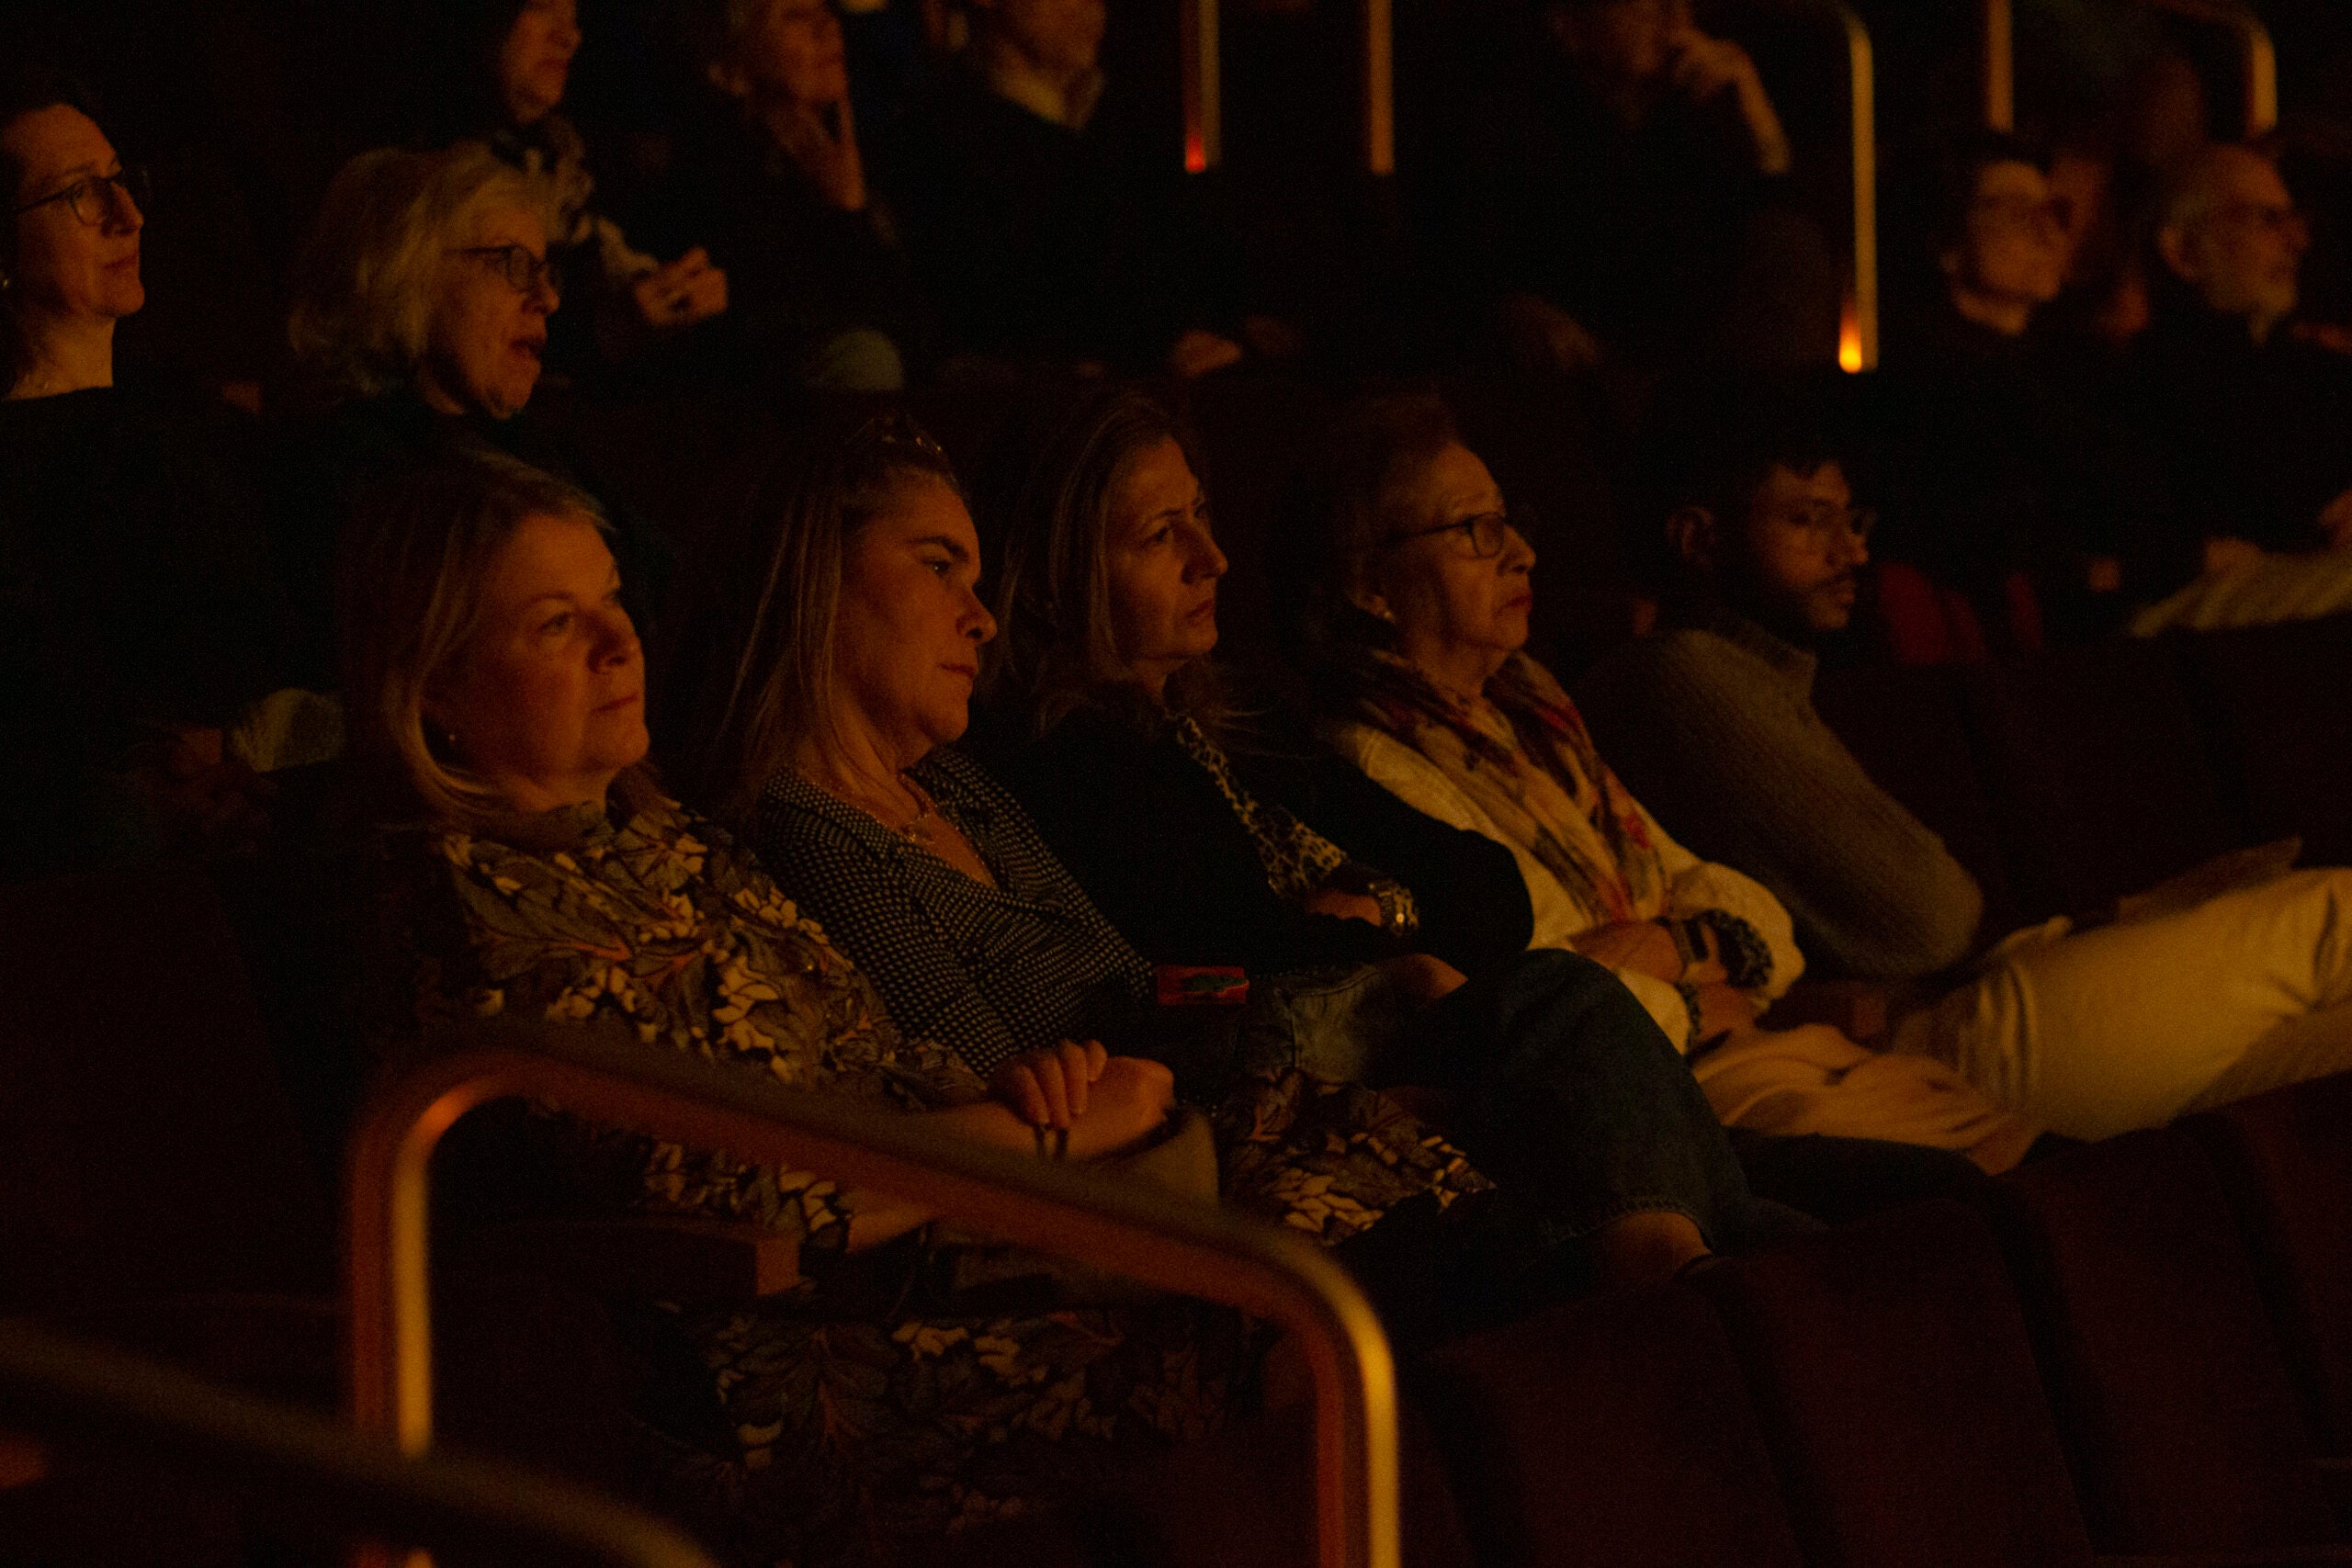 Four women are seated together in a dark auditorium. They are watching the film.